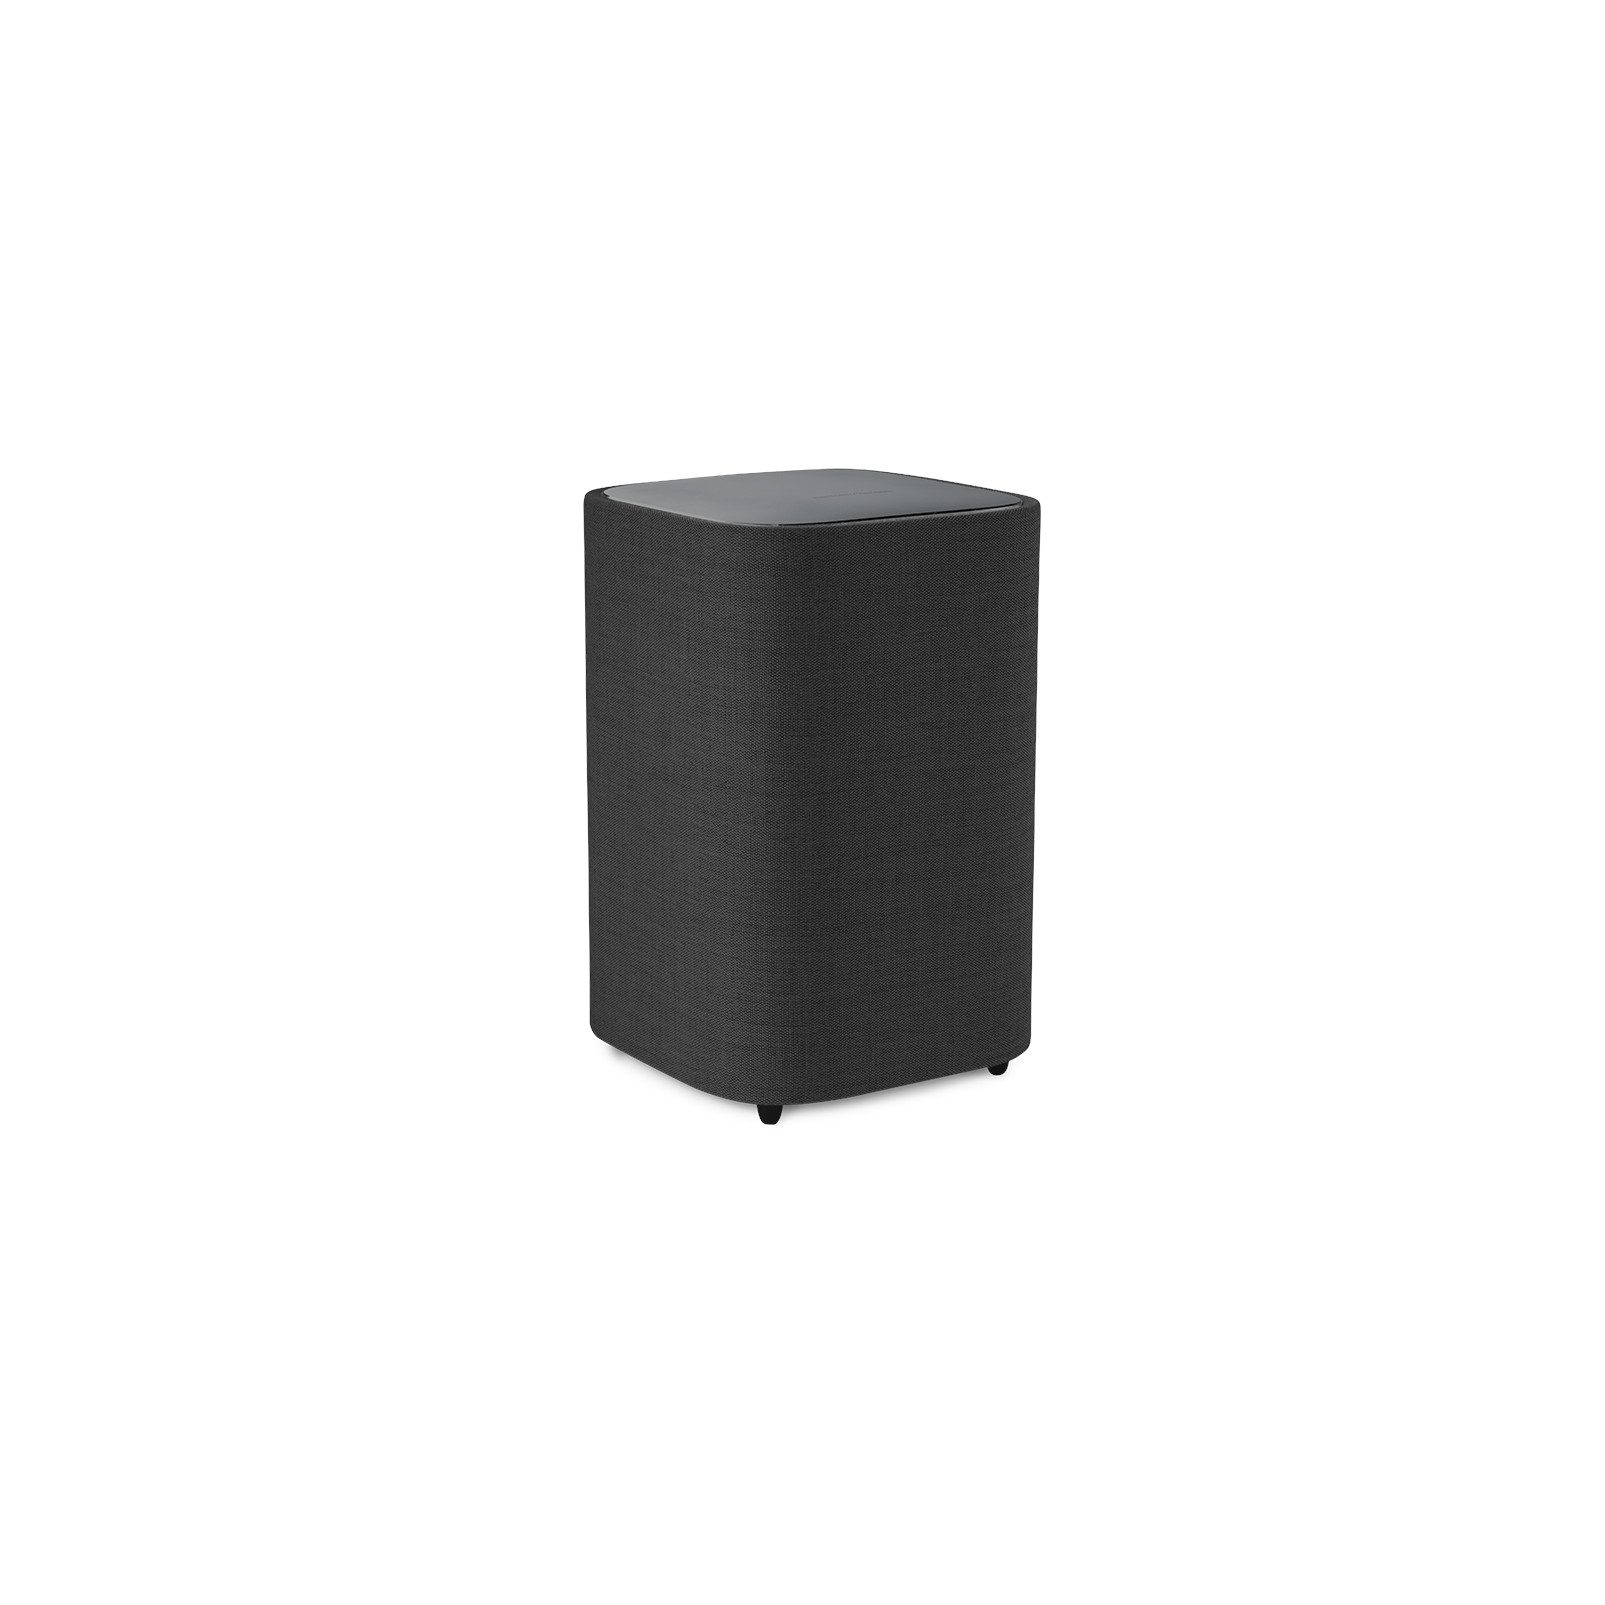 Citation Sub S, WiSA-powered compact wireless subwoofer